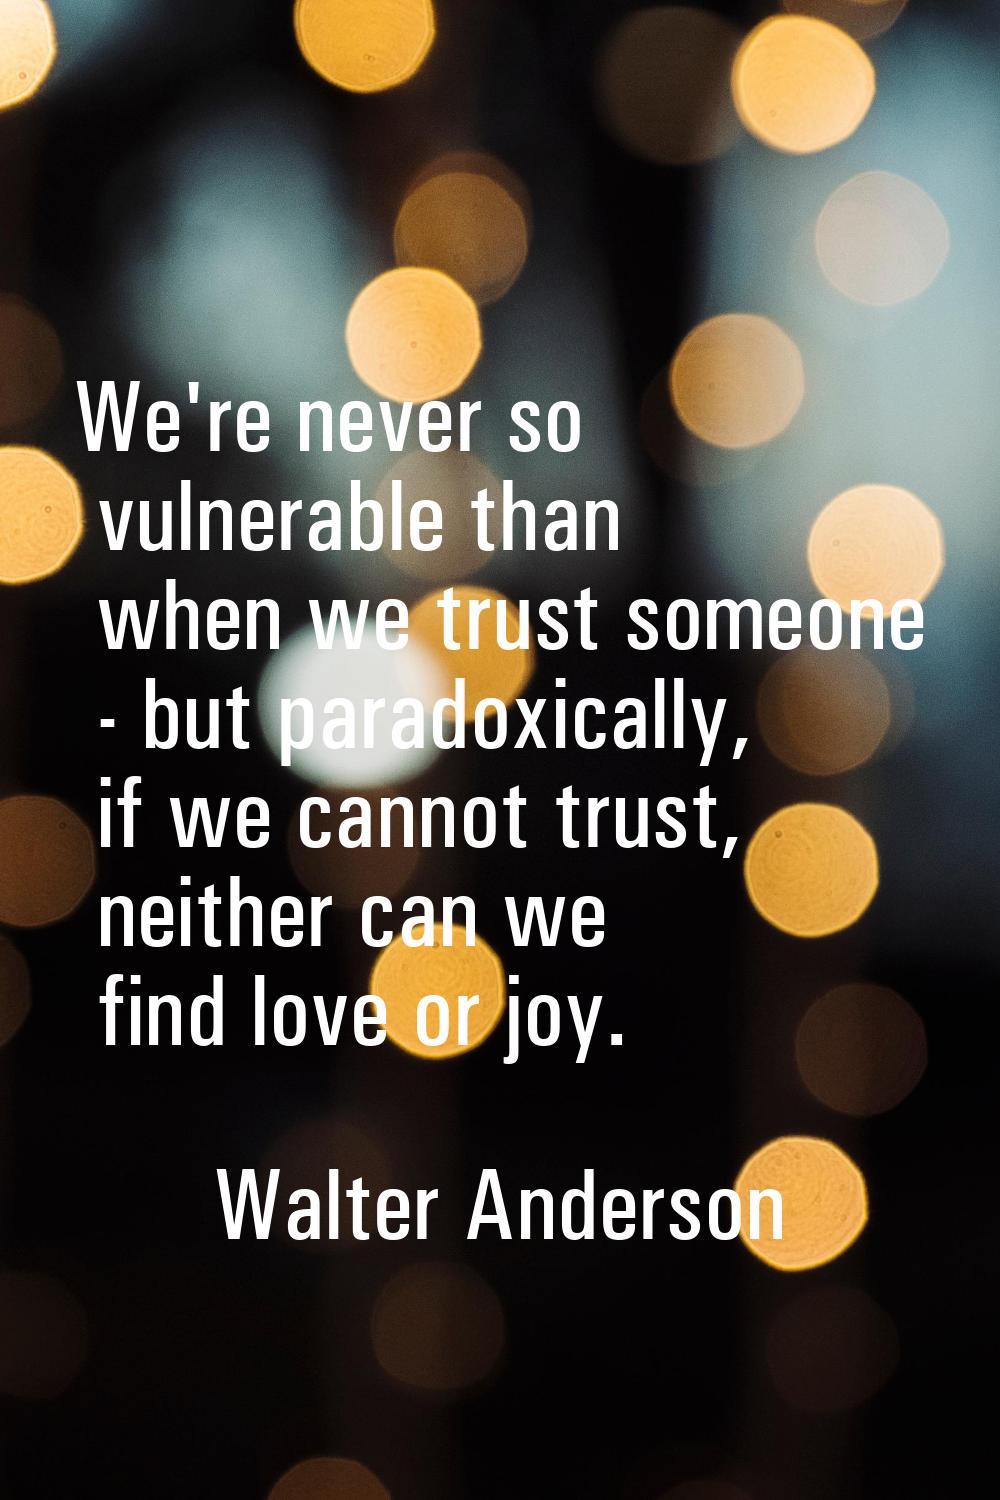 We're never so vulnerable than when we trust someone - but paradoxically, if we cannot trust, neith